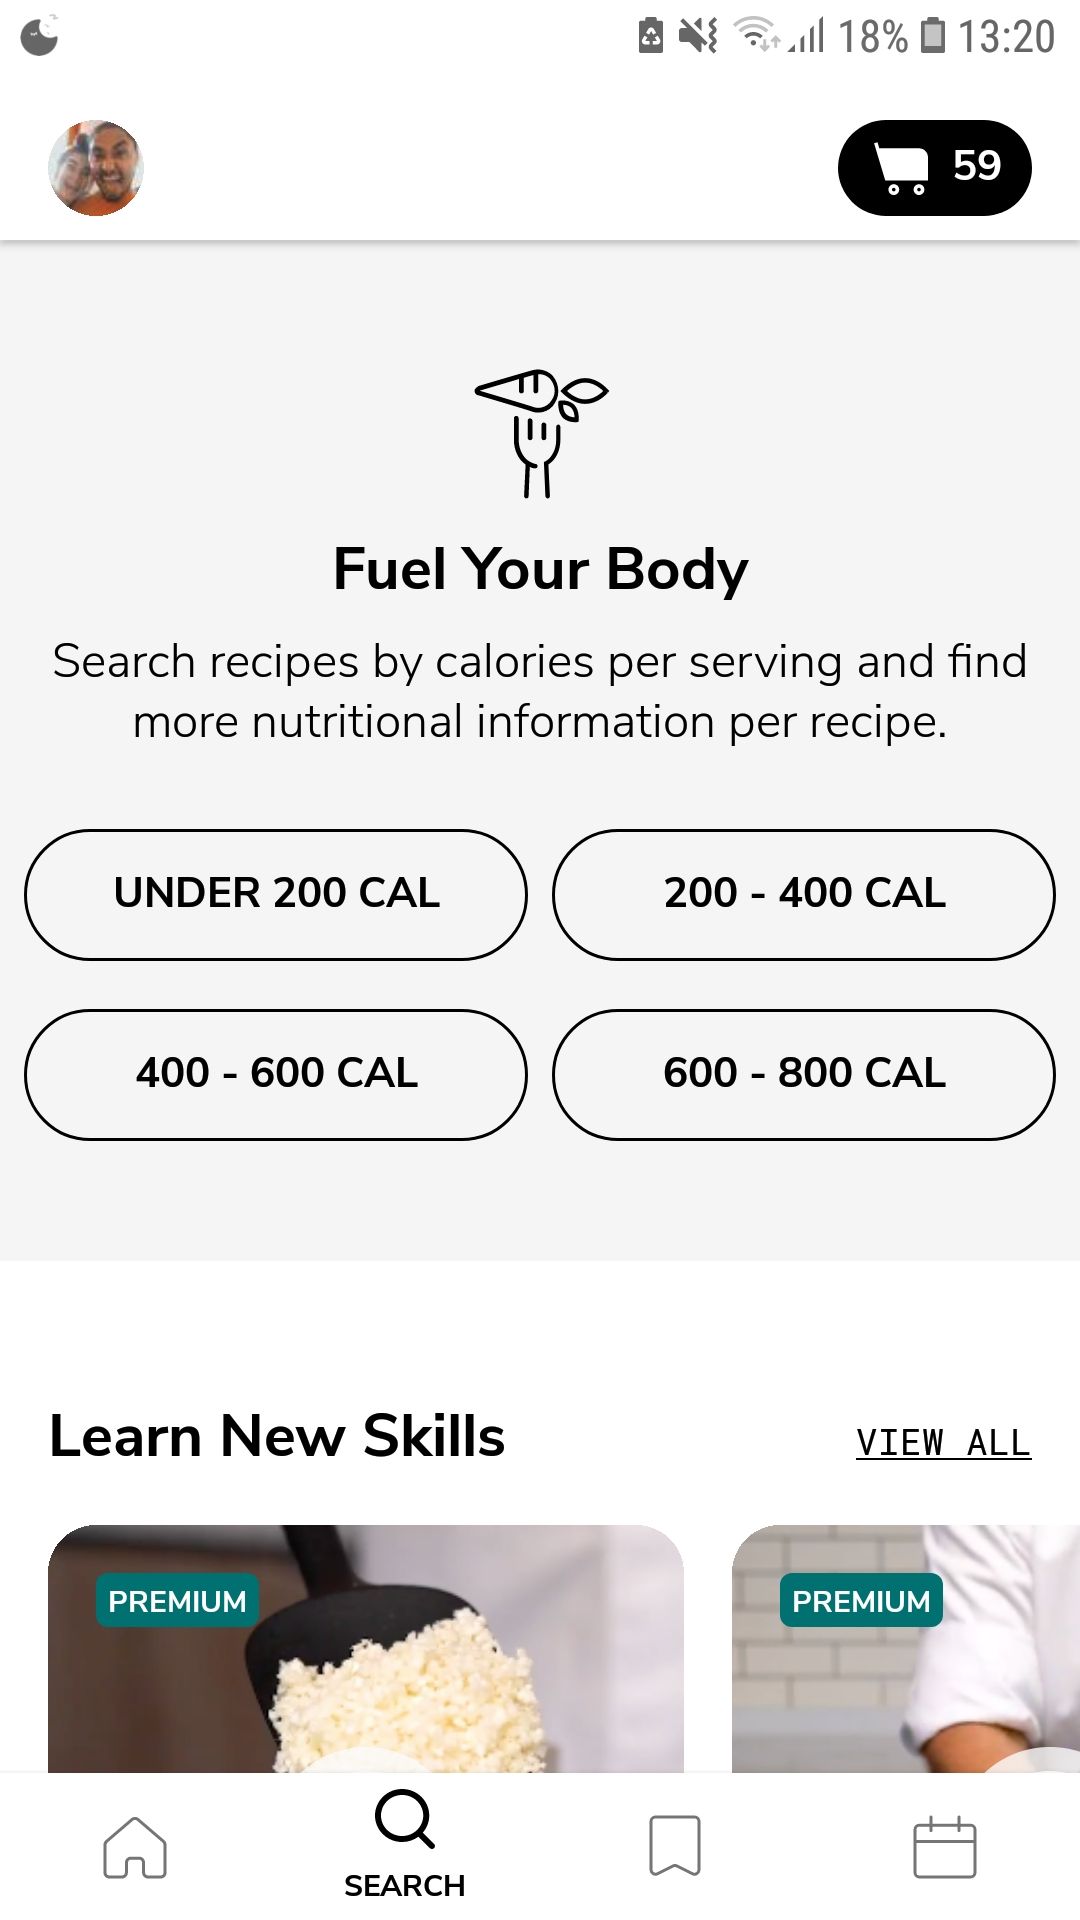 SideChef mobile recipe and meal planning app calories